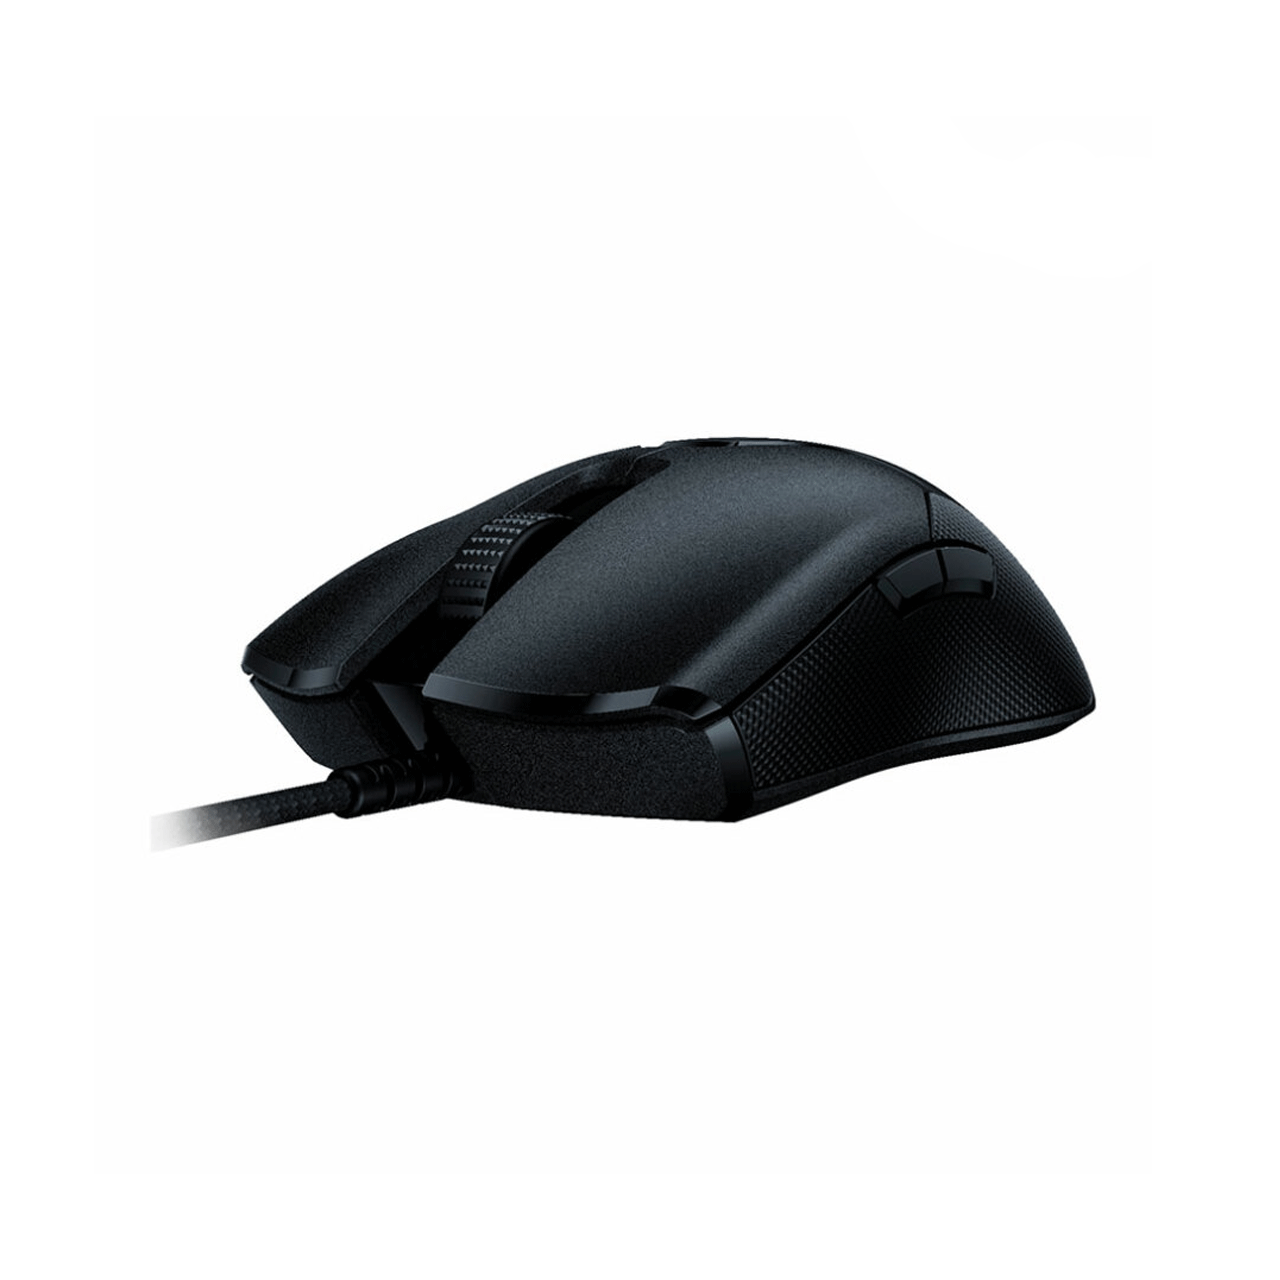 VIPER--ULTIMATE--Wireless-Gaming-Mouse